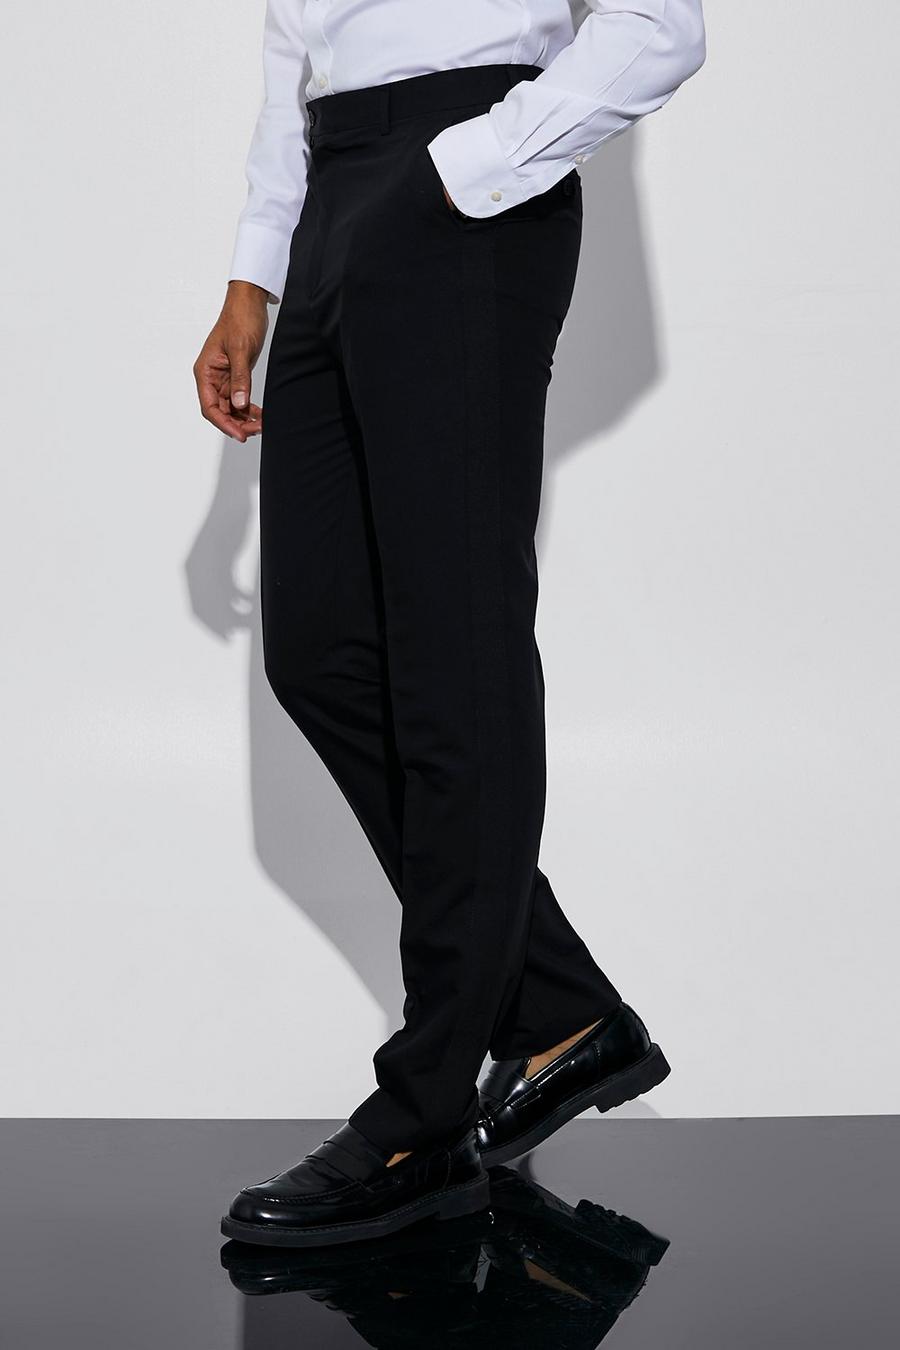 Mens Straight Leg Trouser With Tape Boohoo Women Clothing Pants Formal Pants 28 